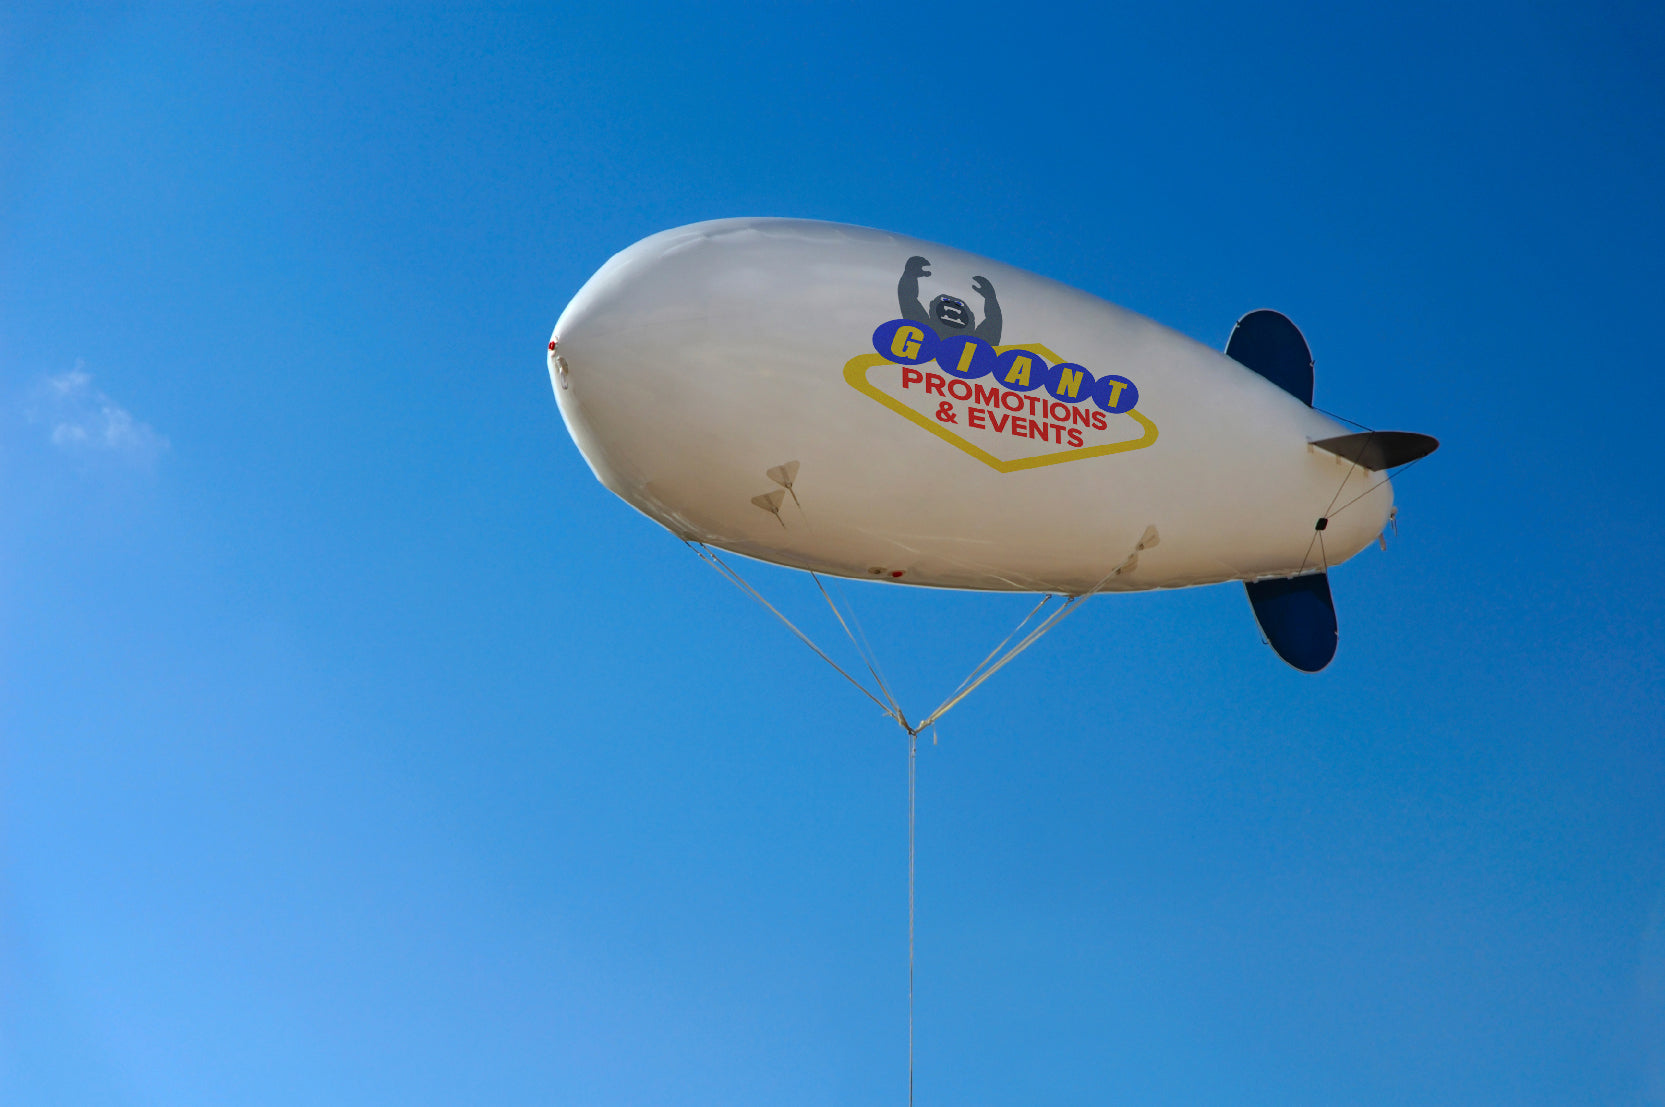 Image of a large white and blue blimp in the sky with Giant Promotions logo